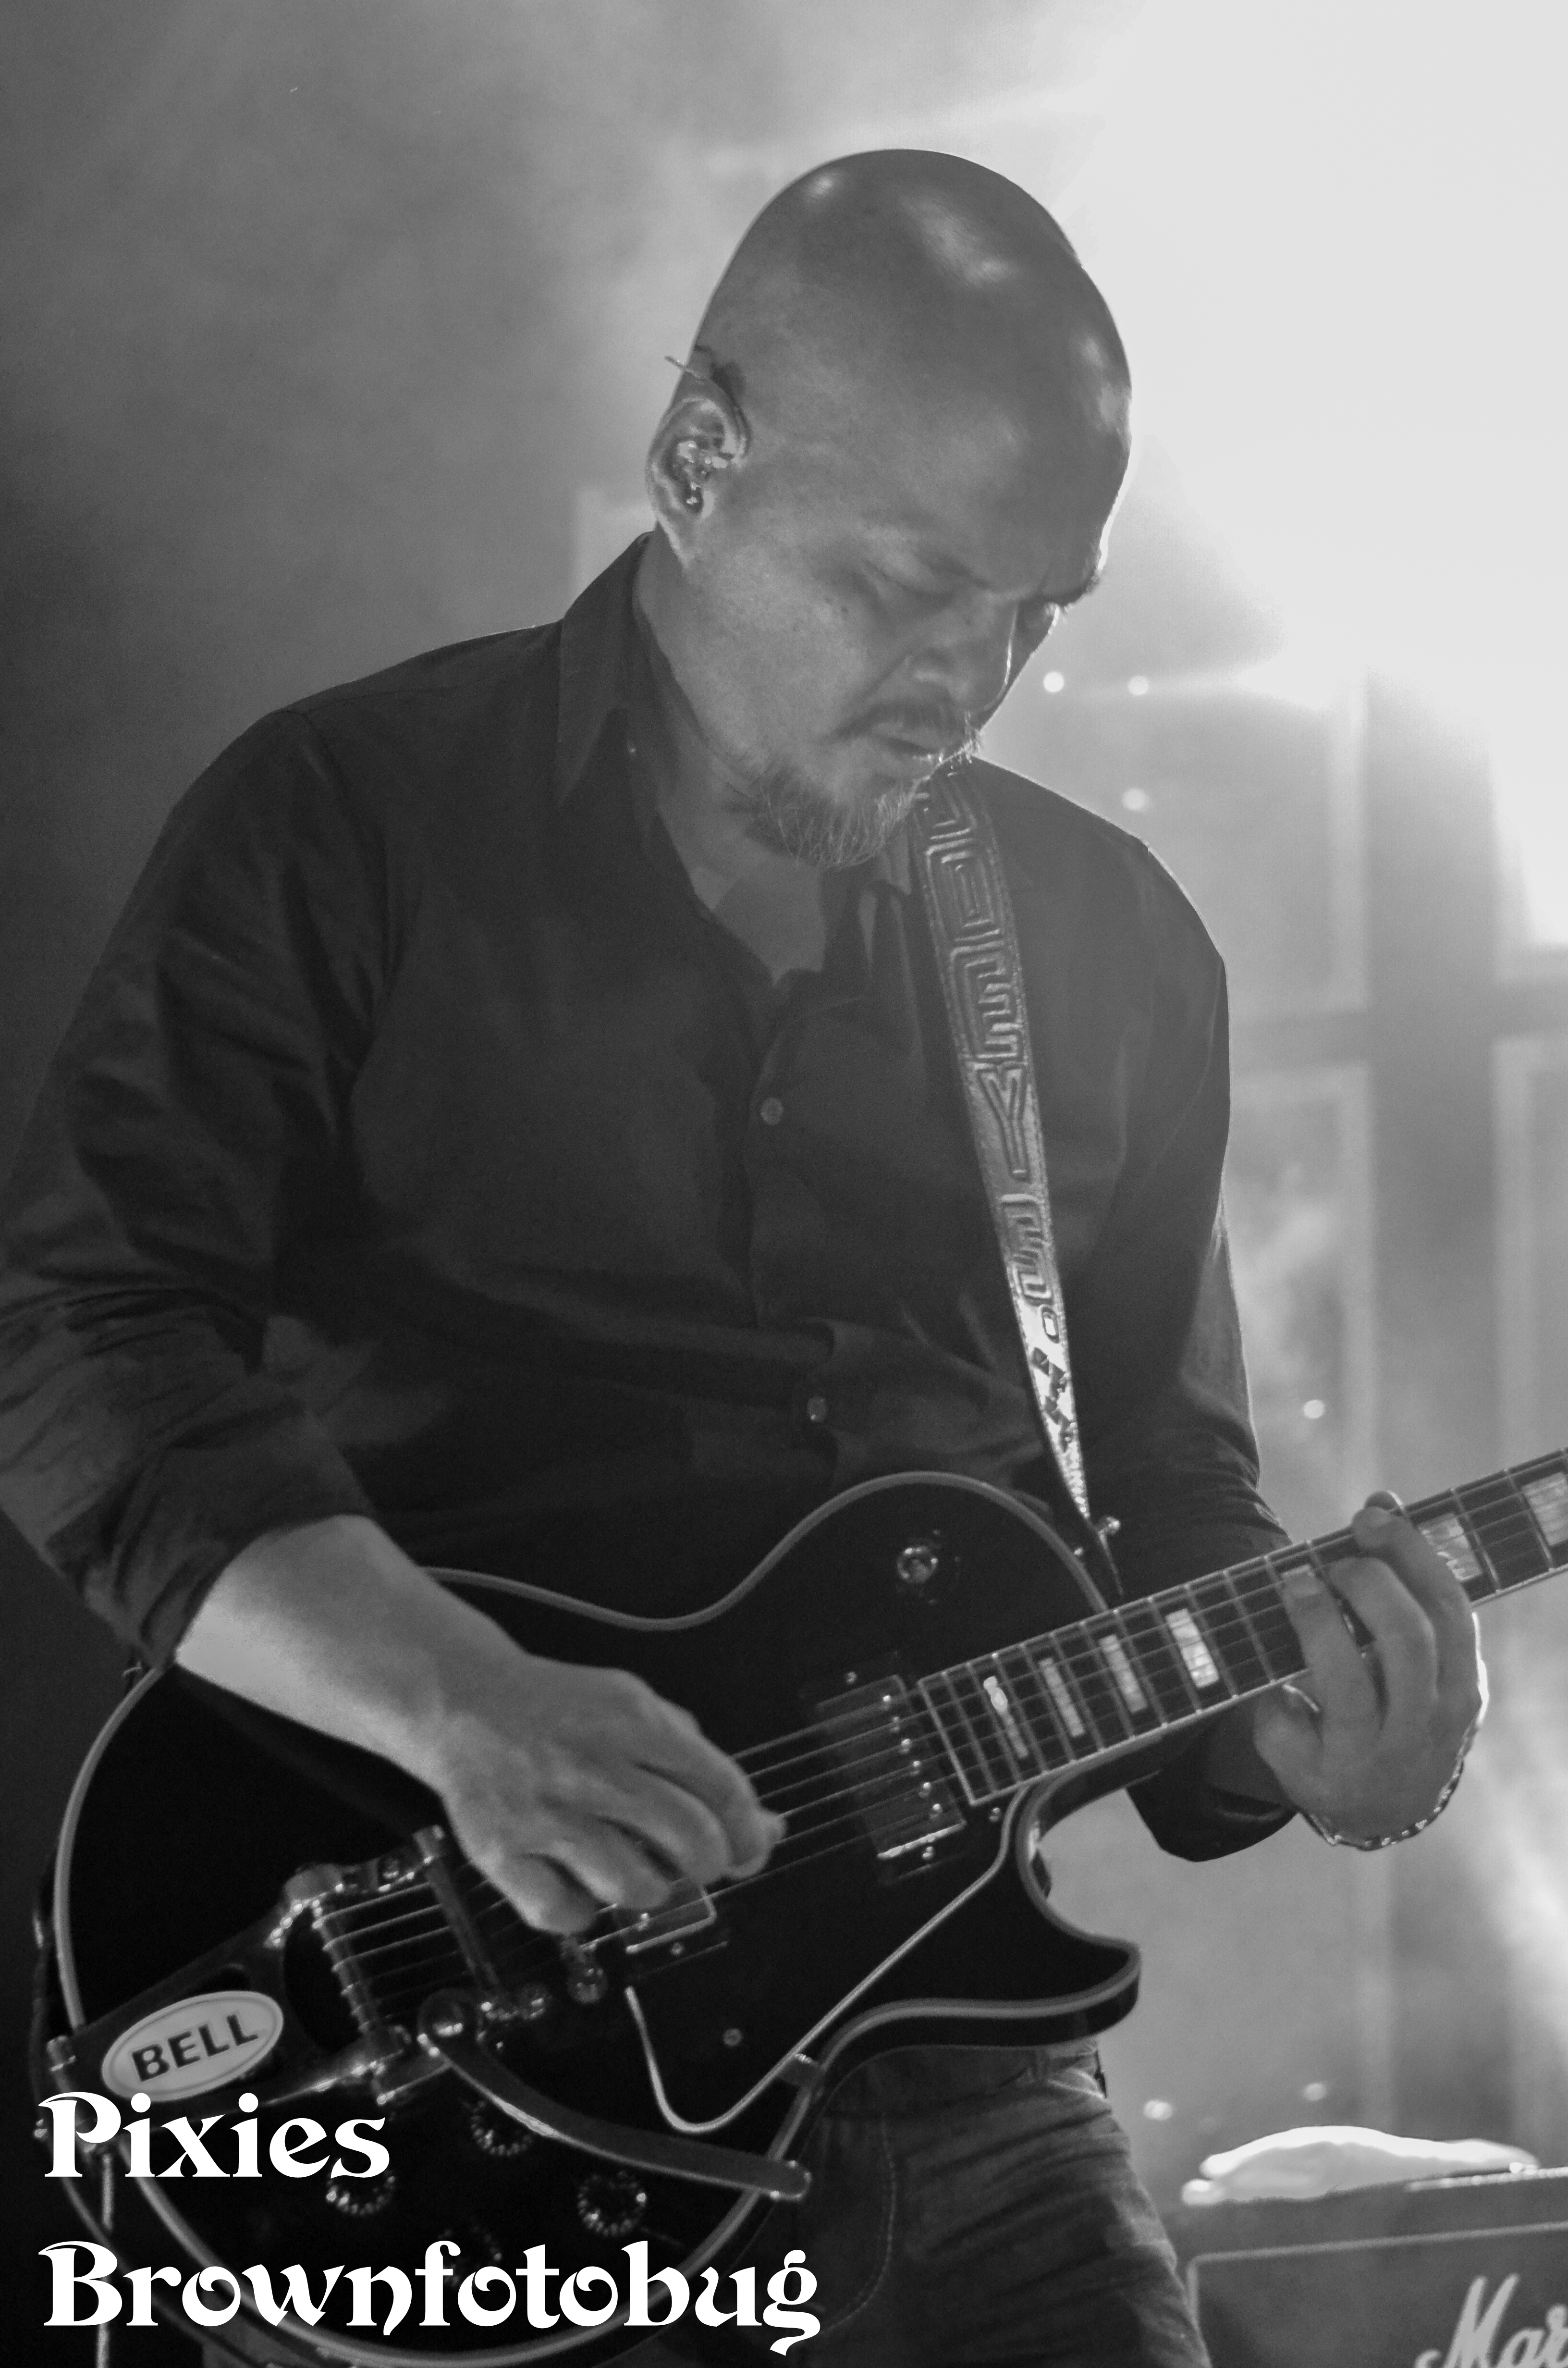 Pixies and Best Coast live @ The Paramount (Photo by Arlene Brown)